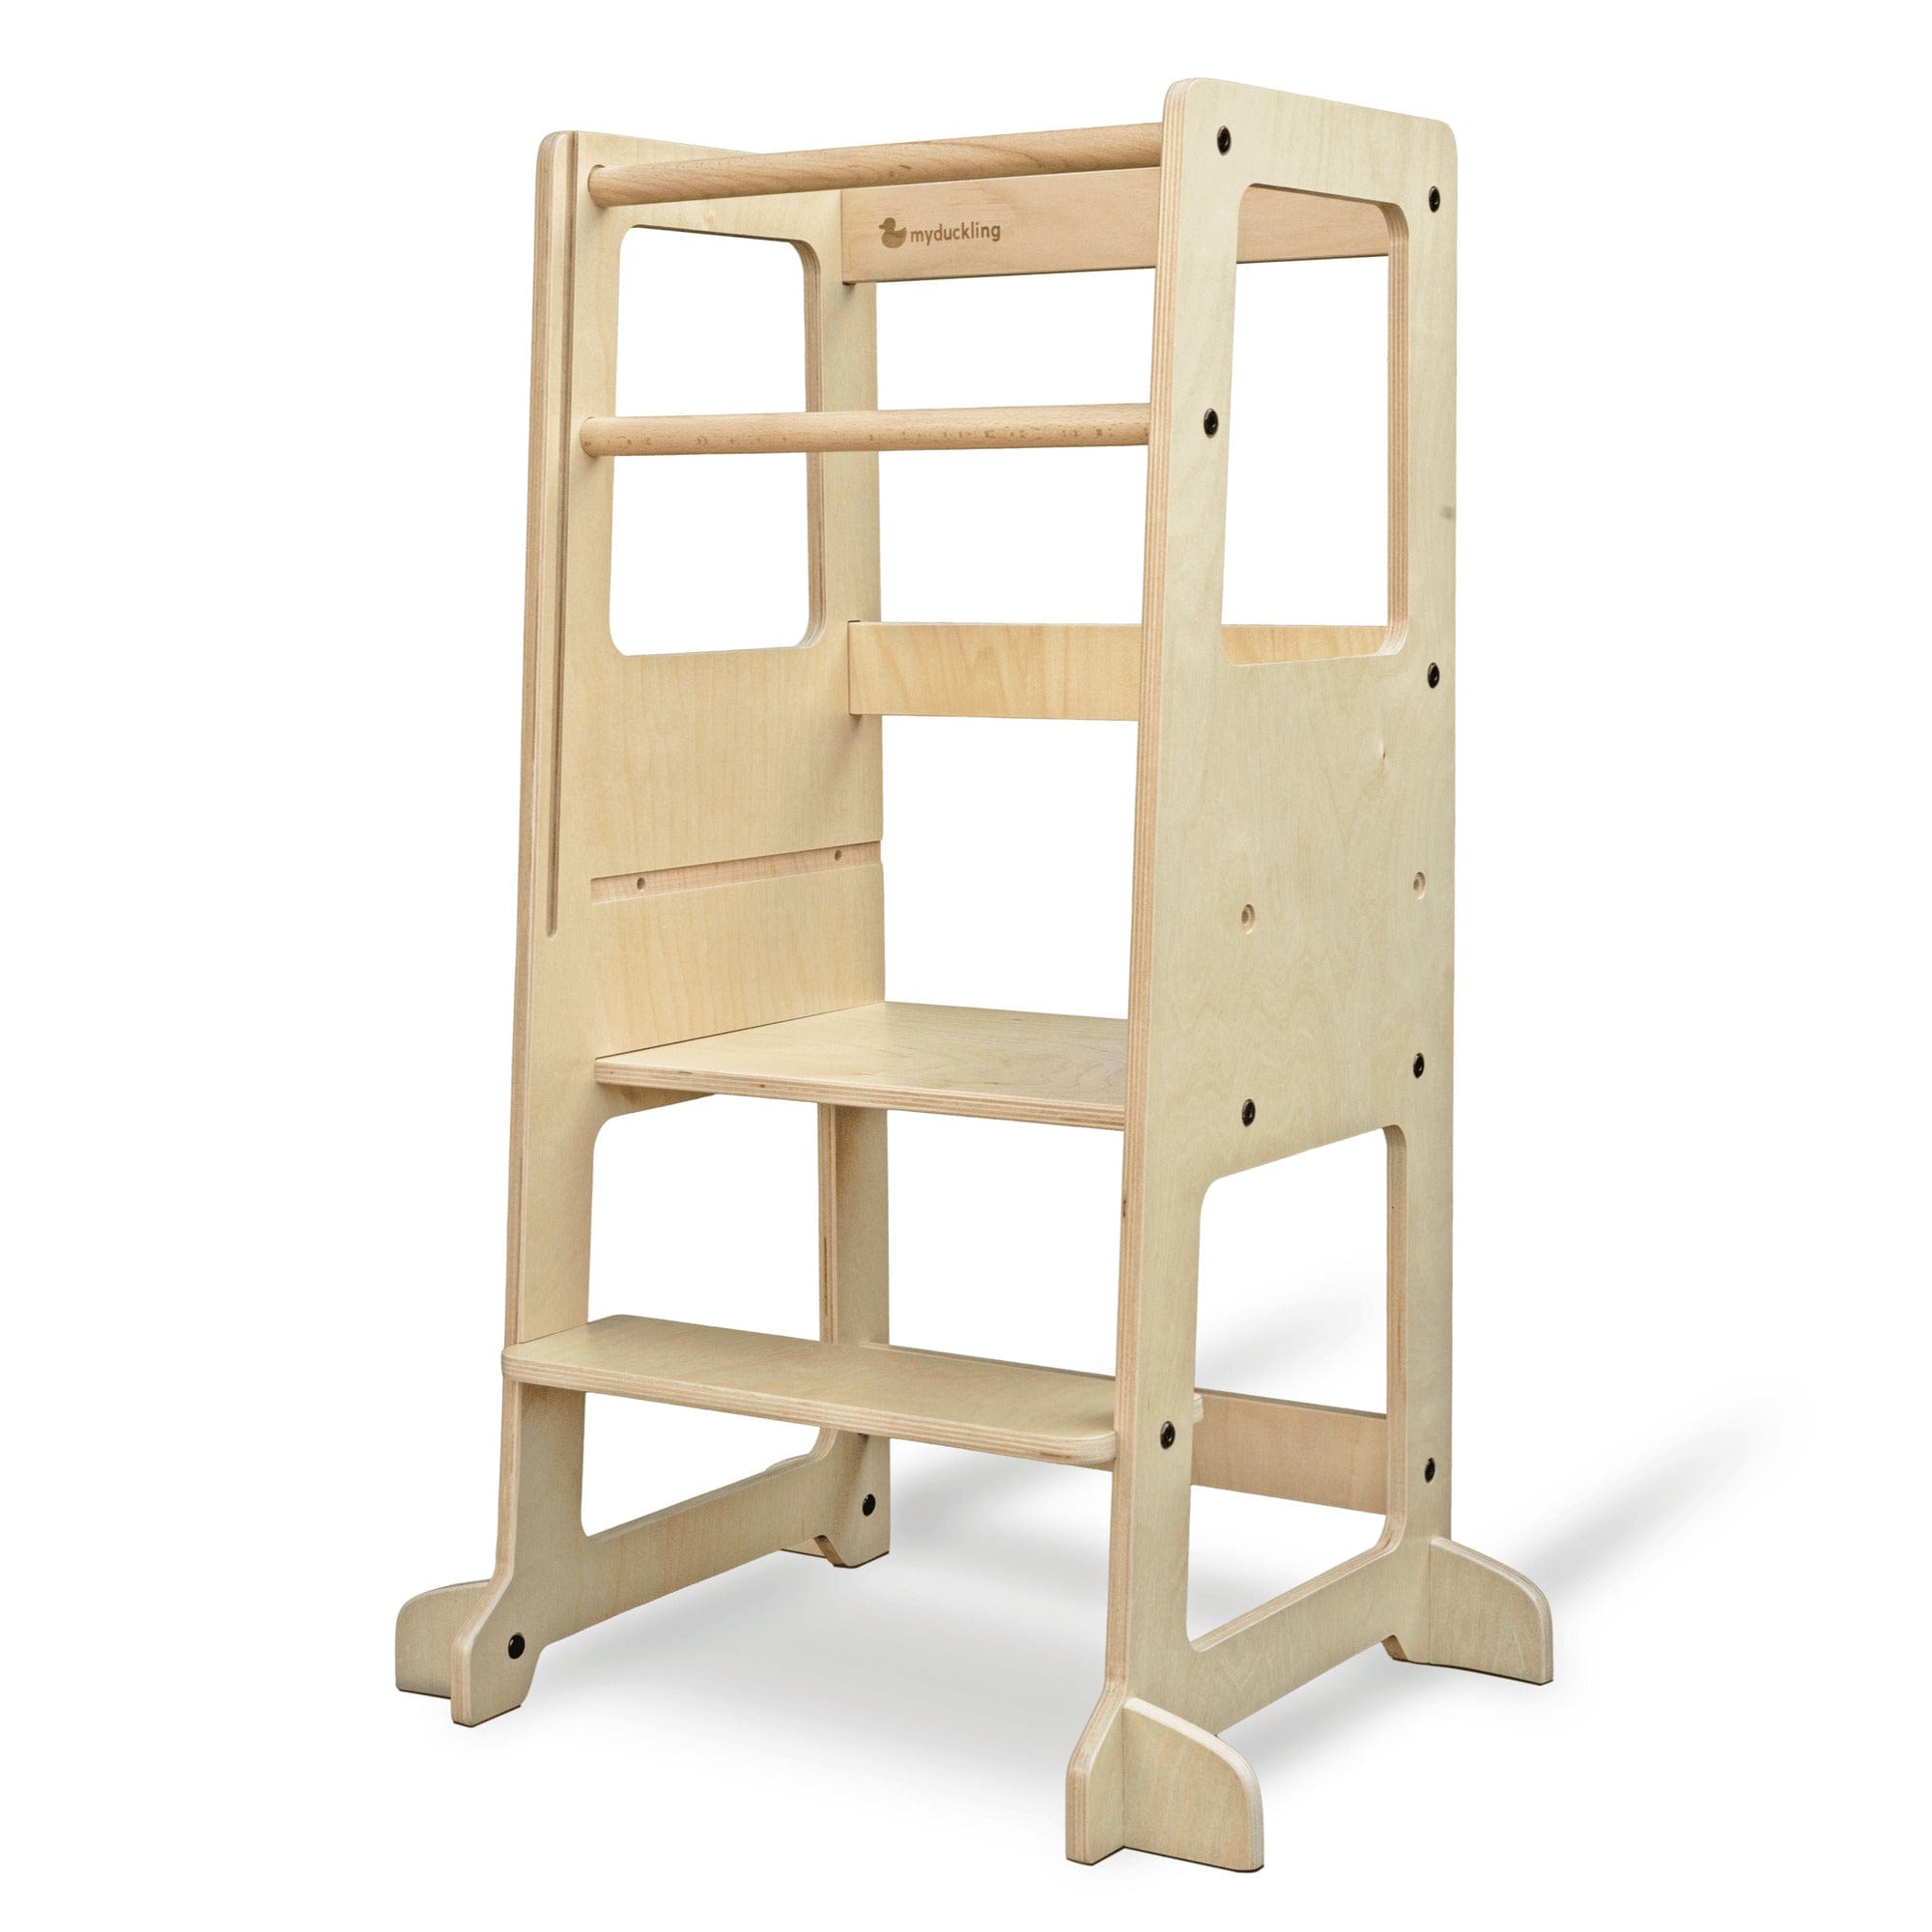 My Duckling LOLA Deluxe Adjustable Learning Tower - Natural